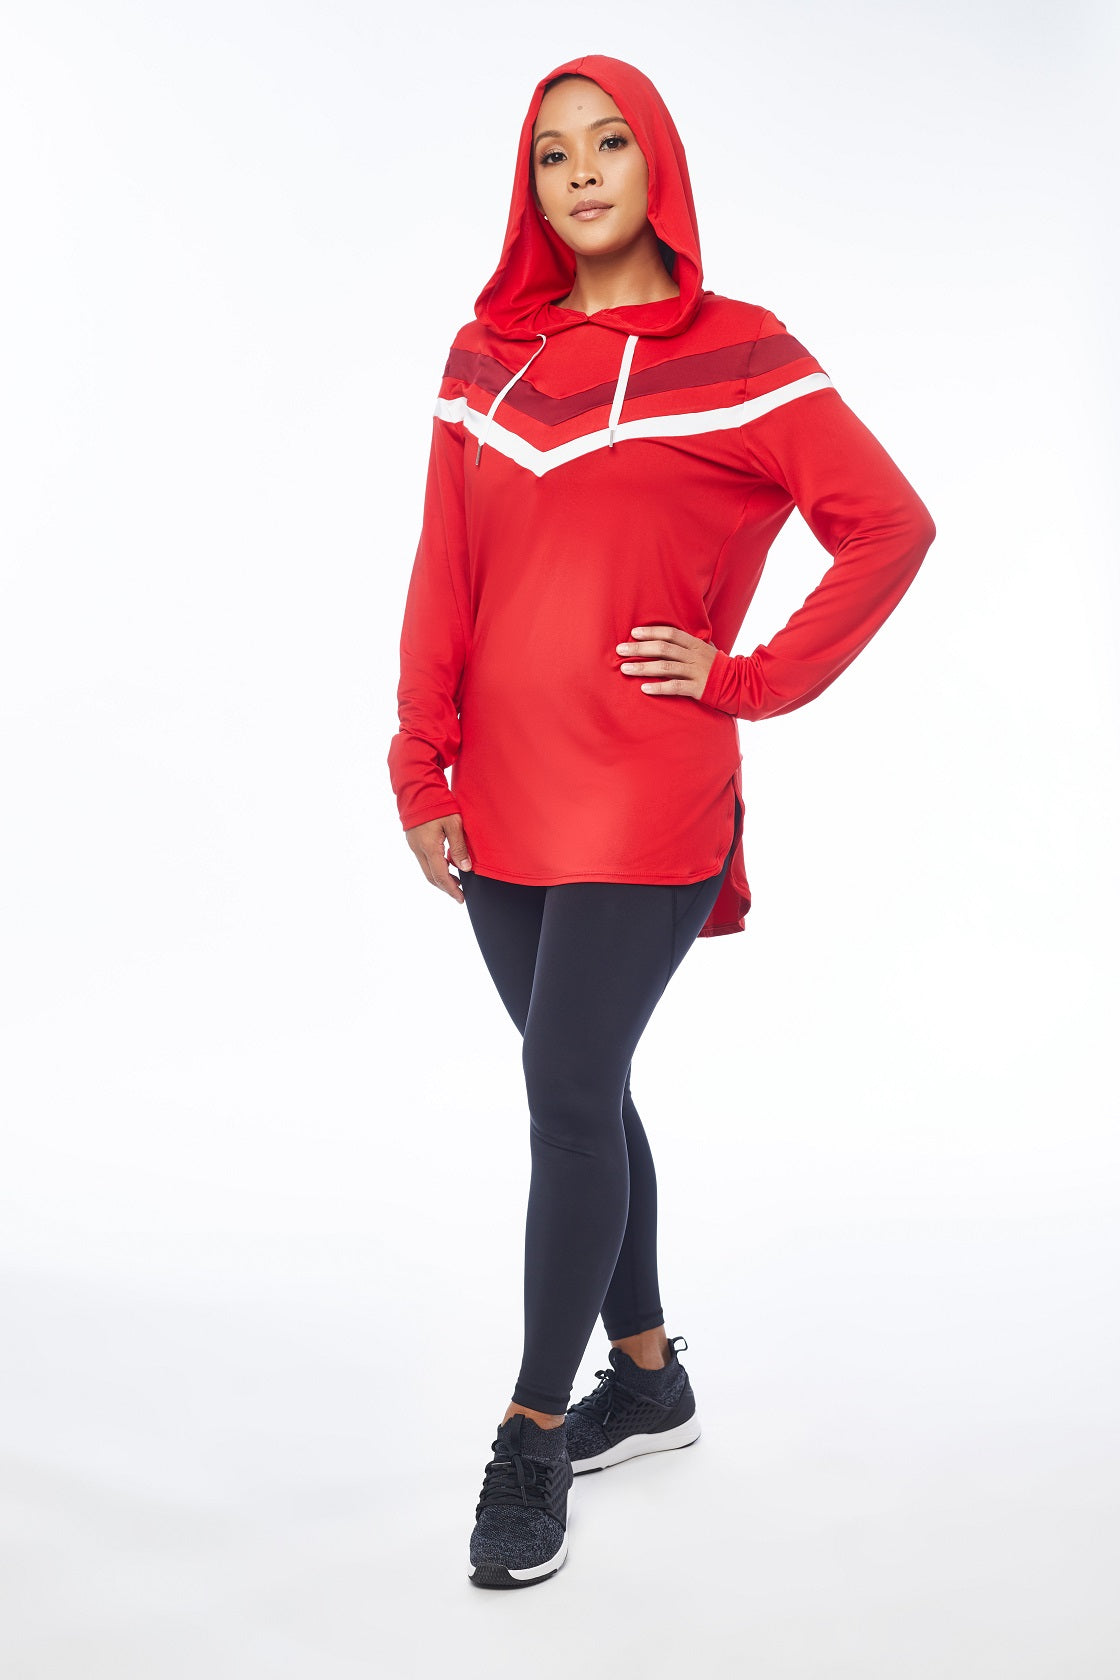 RISE UP Long Sleeve Top (Red)